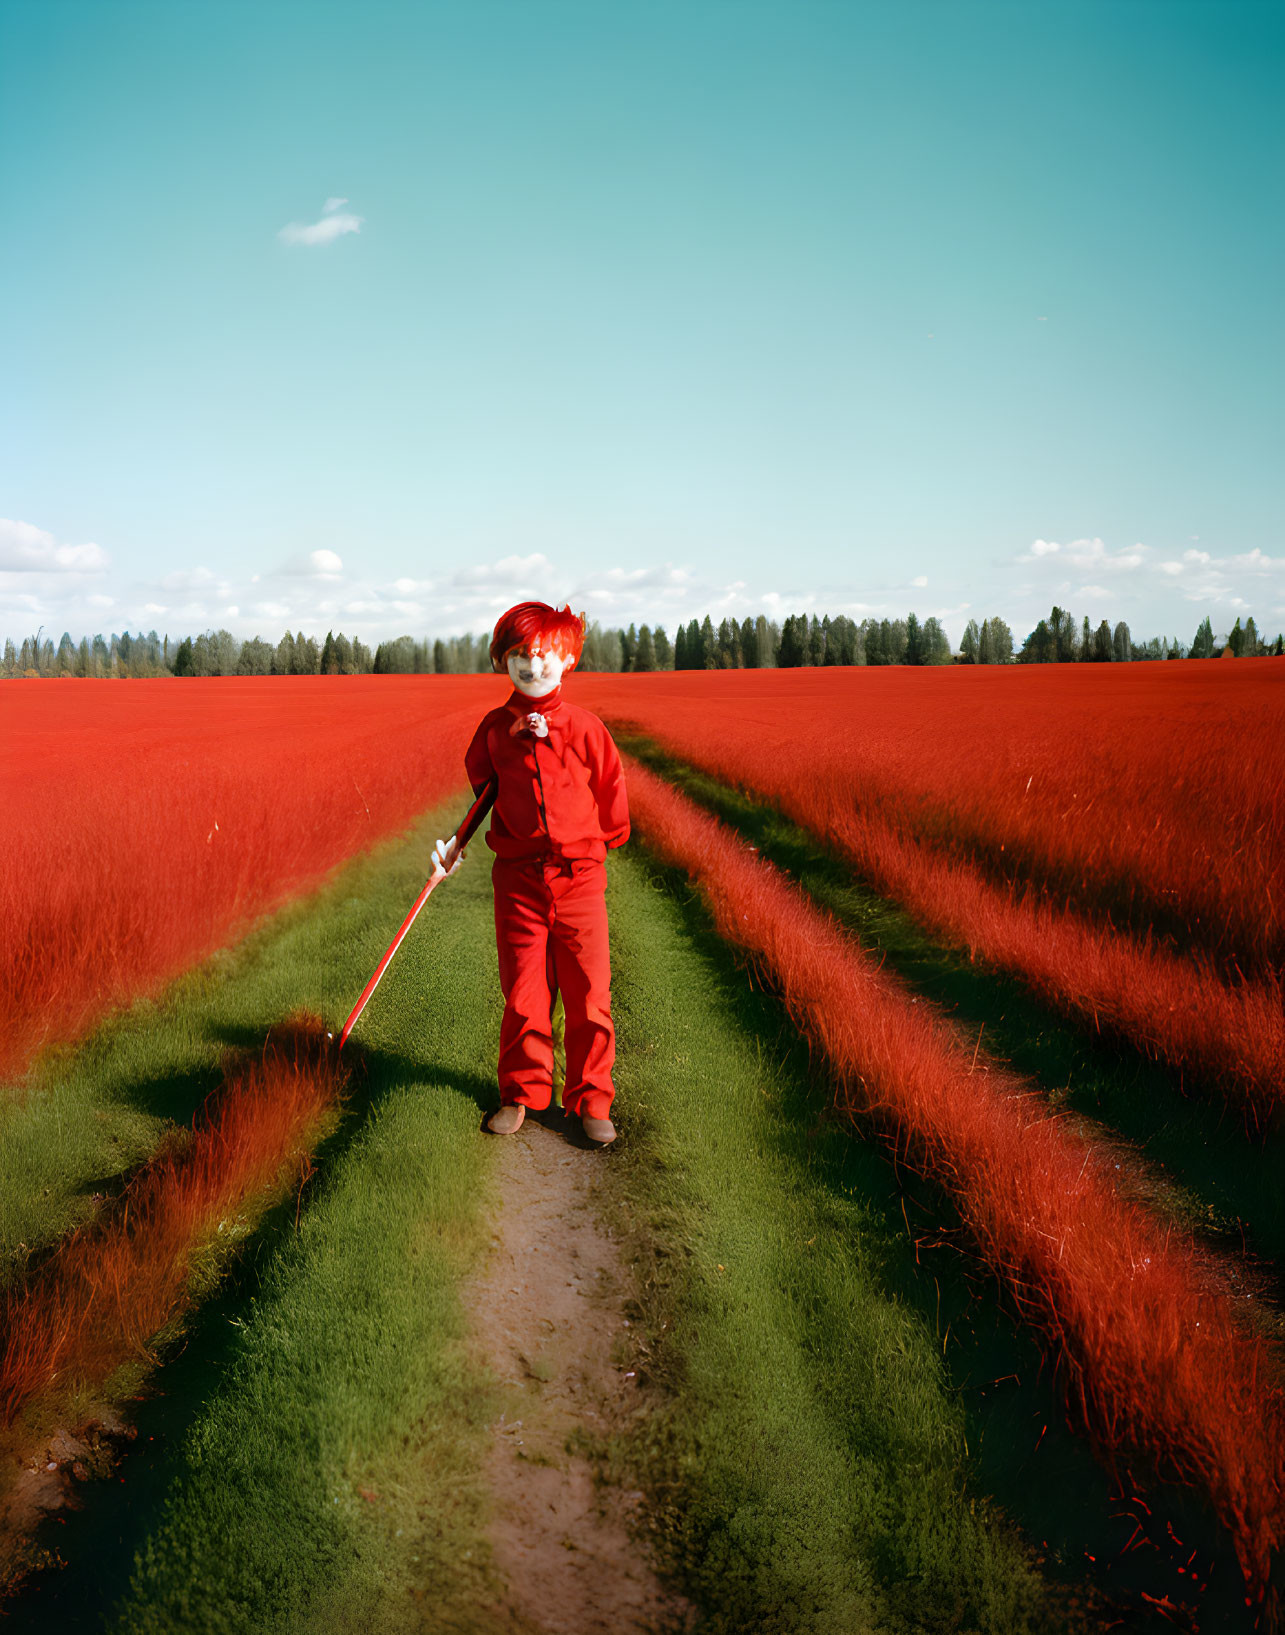 Person in red outfit and clown mask in vibrant field with blue sky holding tool